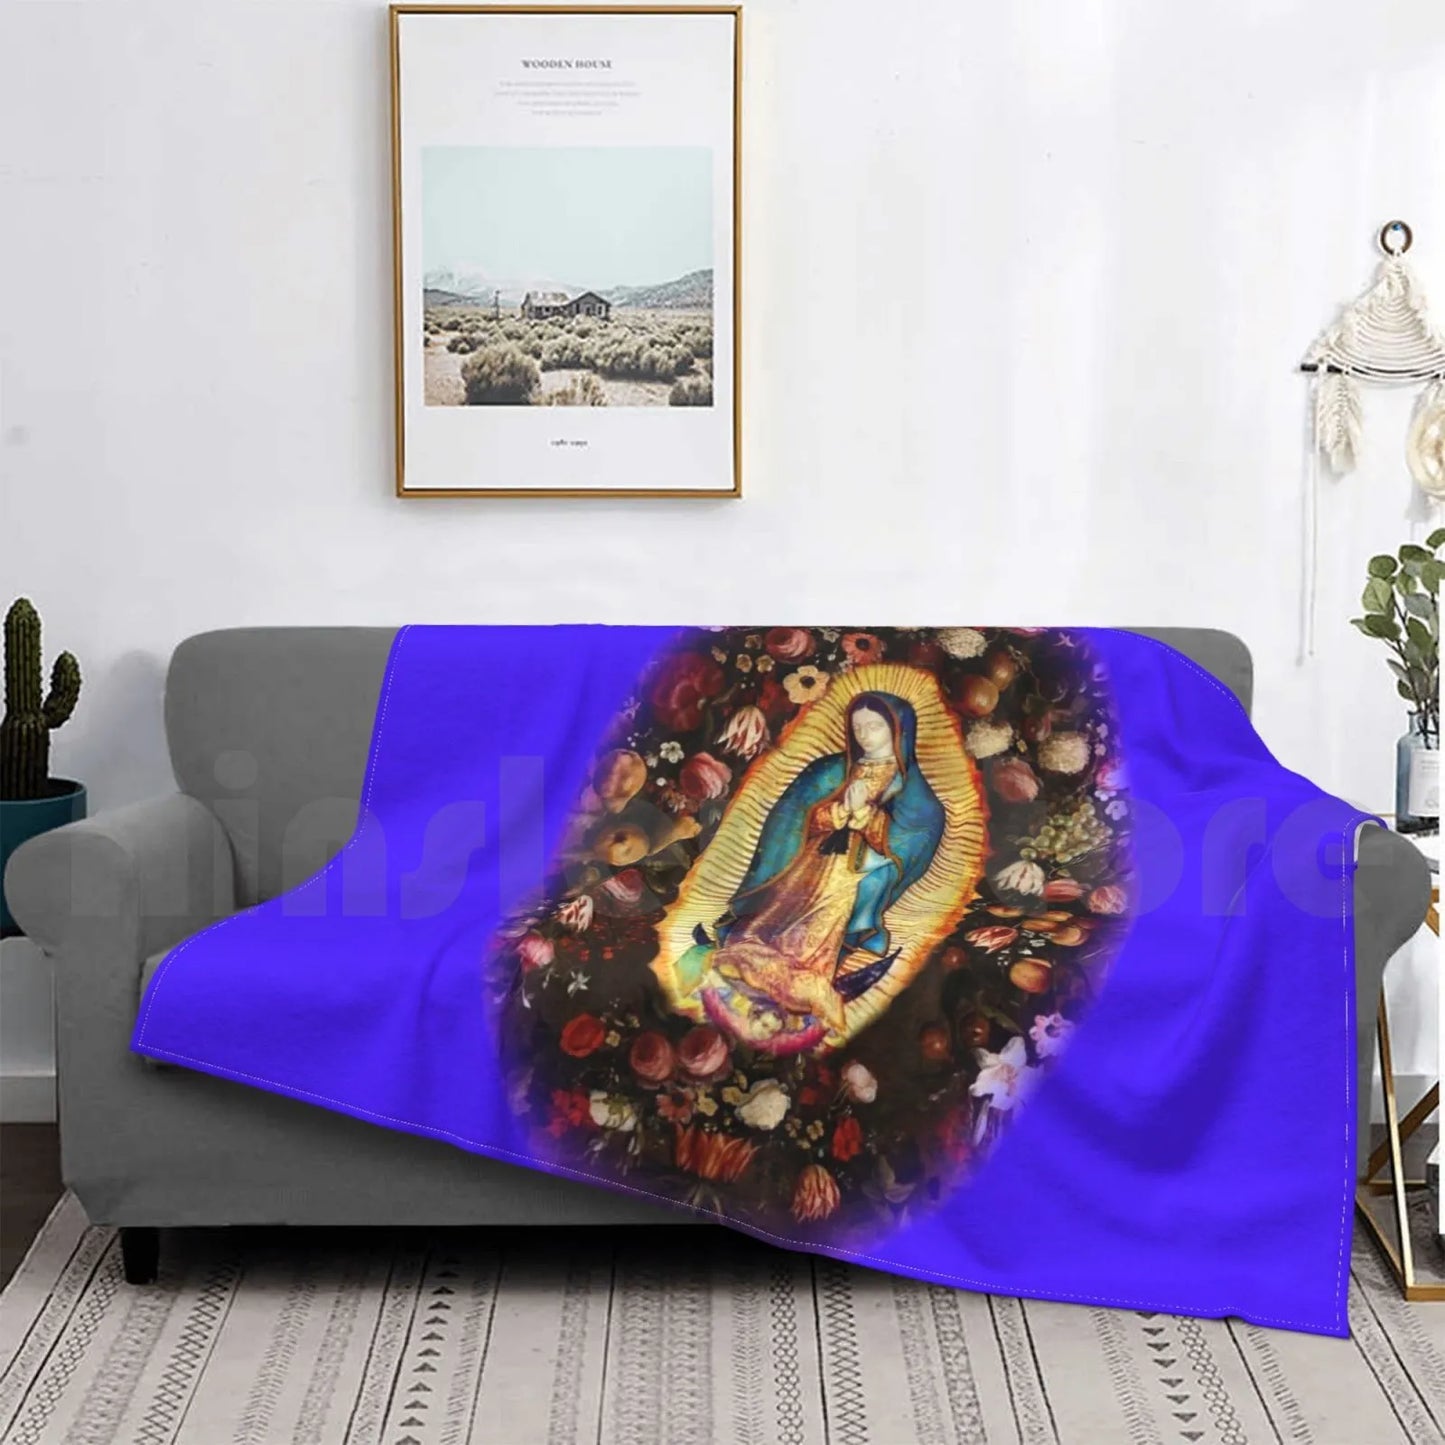 Blanket Our Lady Of Guadalupe Mexican Virgin Mary Mexico Aztec Tilma 20-102 2384 Guadalupe